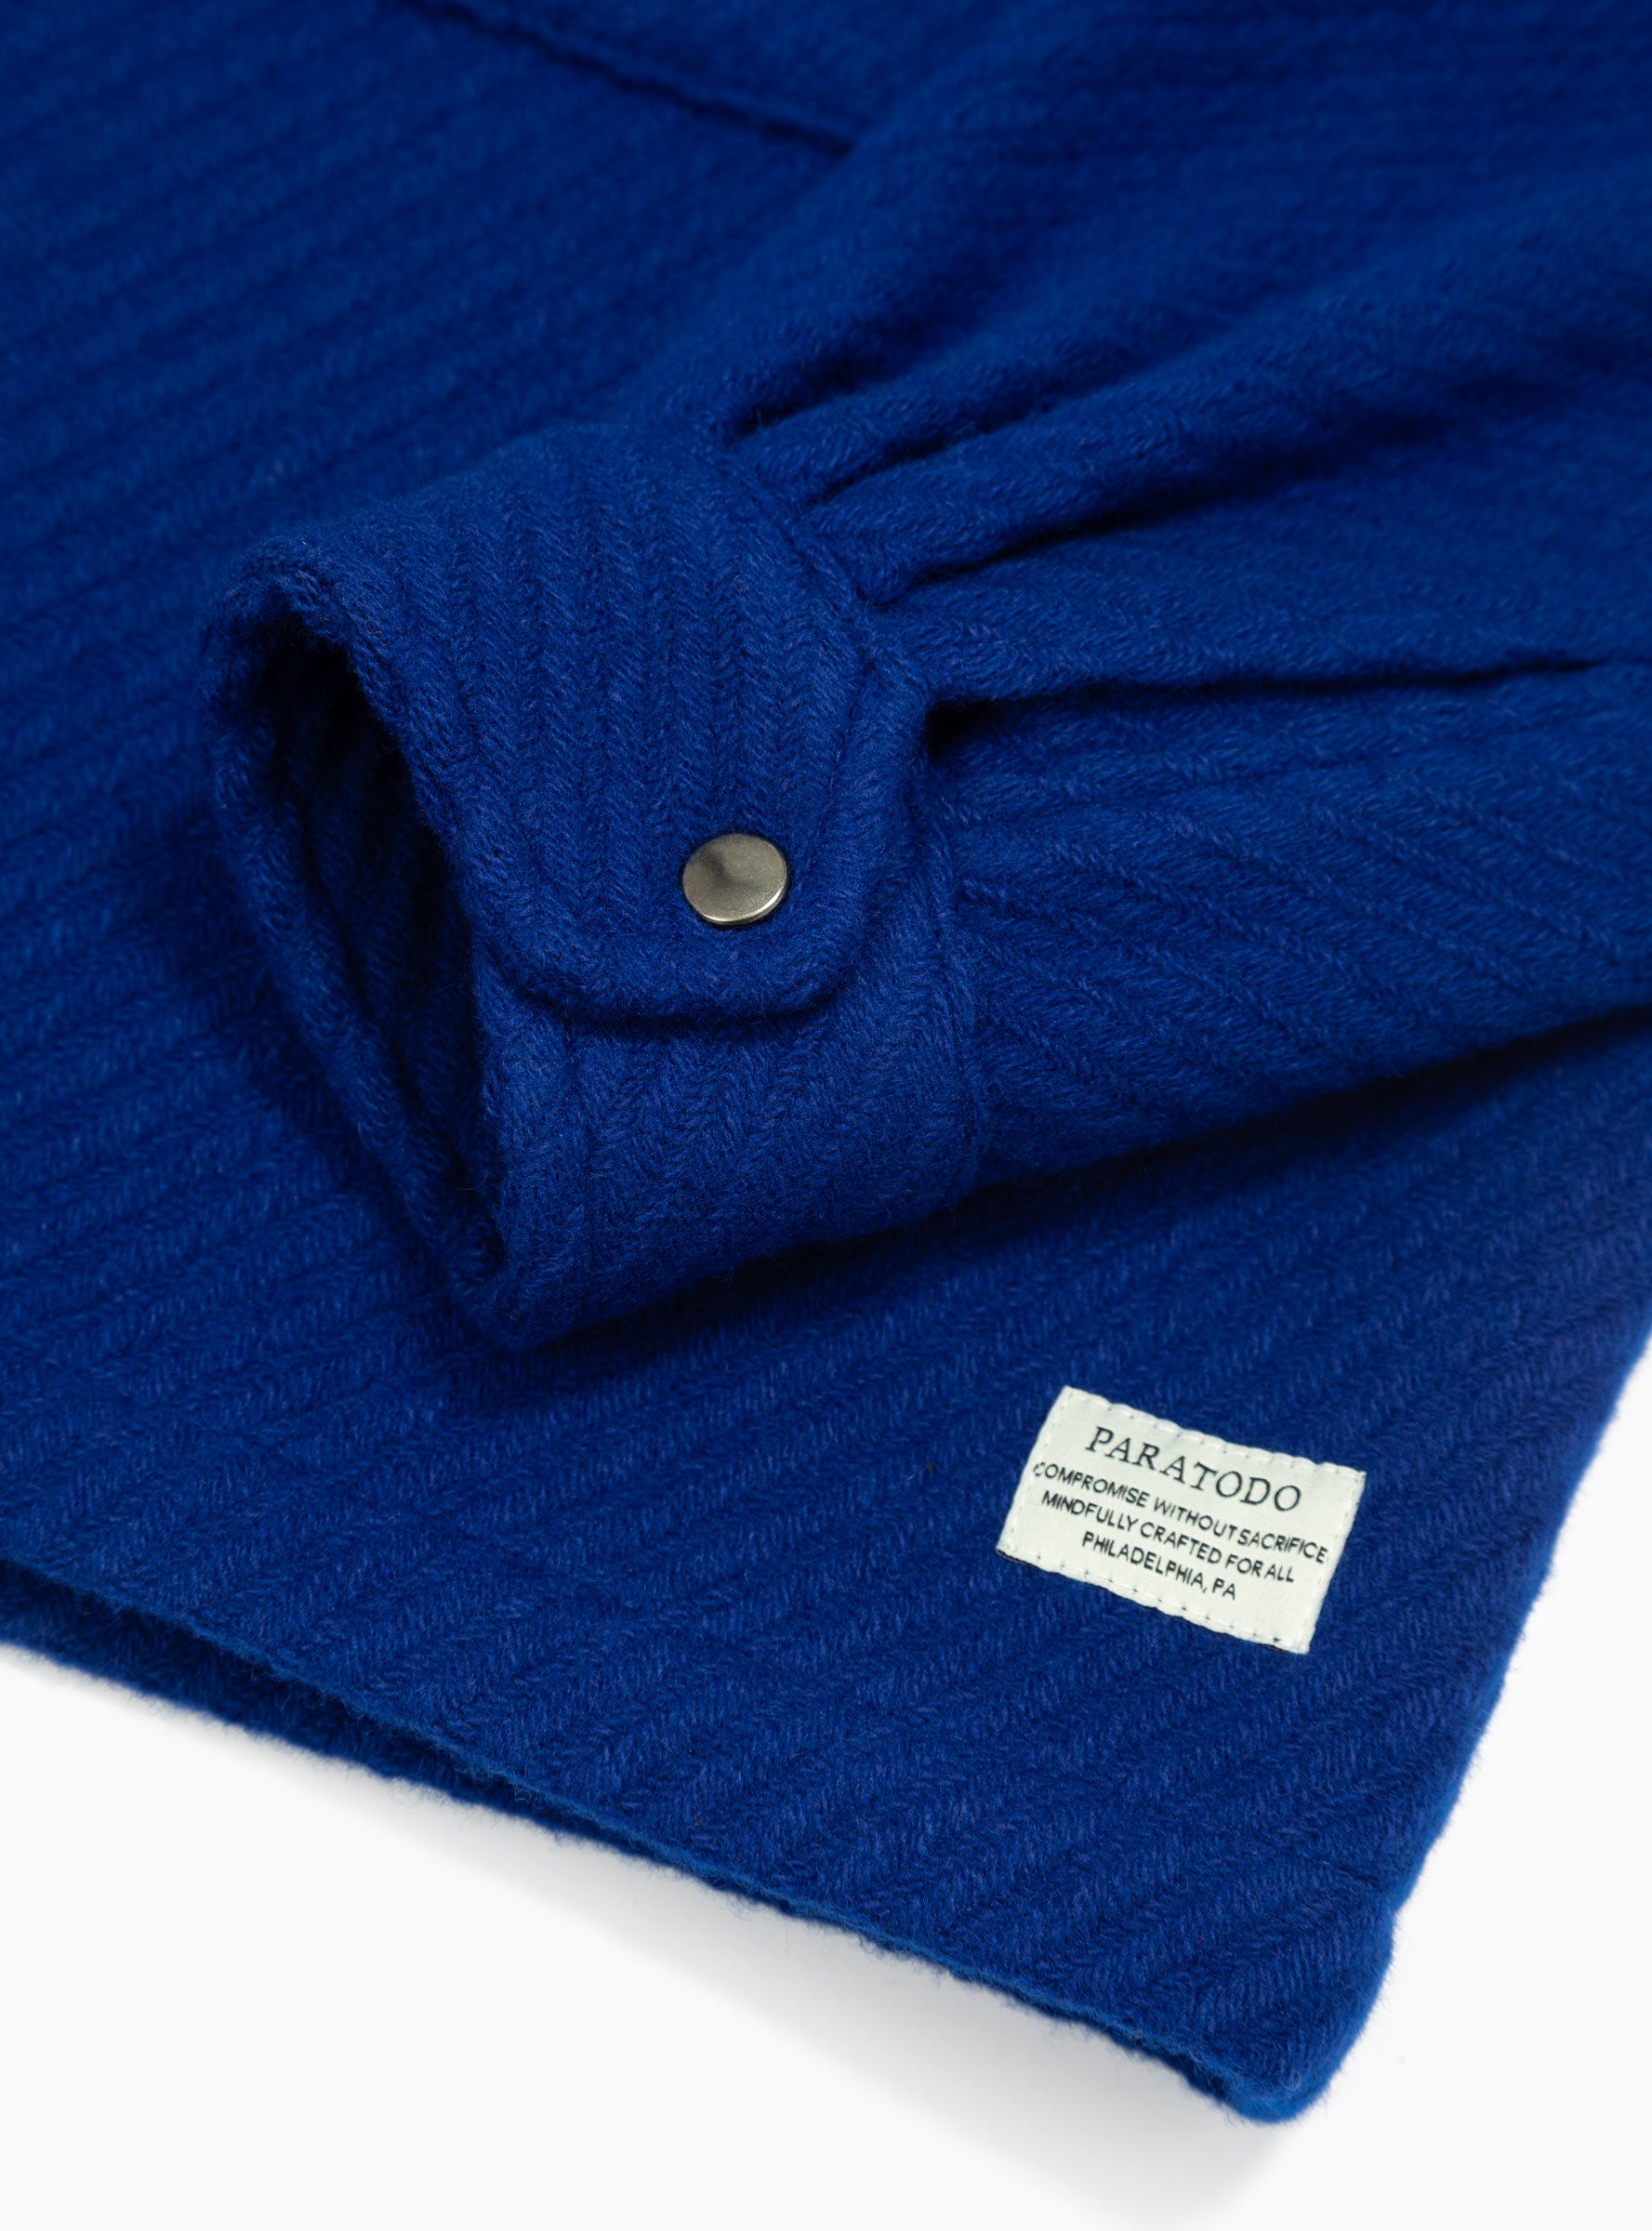 London '68 Wool Jacket Azul Blue by Paratodo | Couverture & The Garbstore